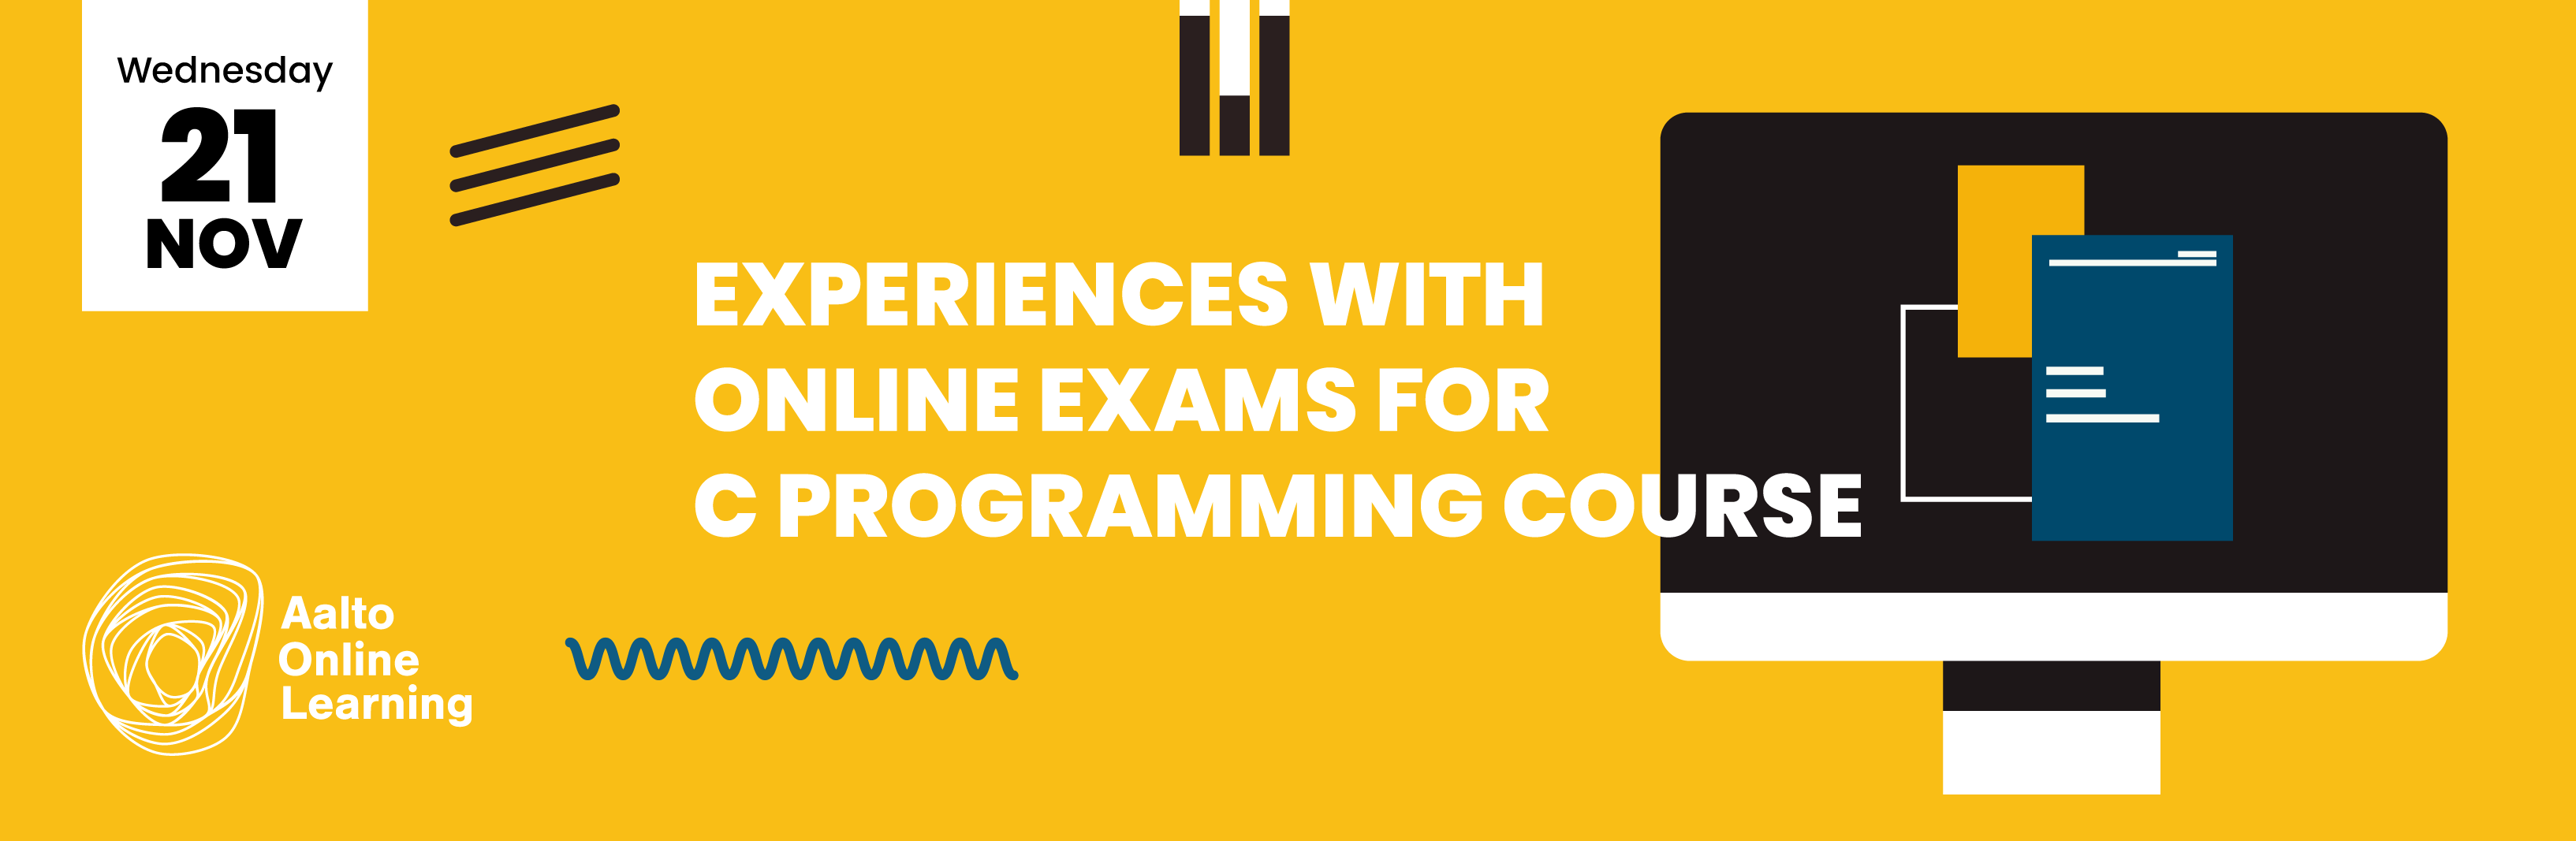 Experiences with online exams for C programming course